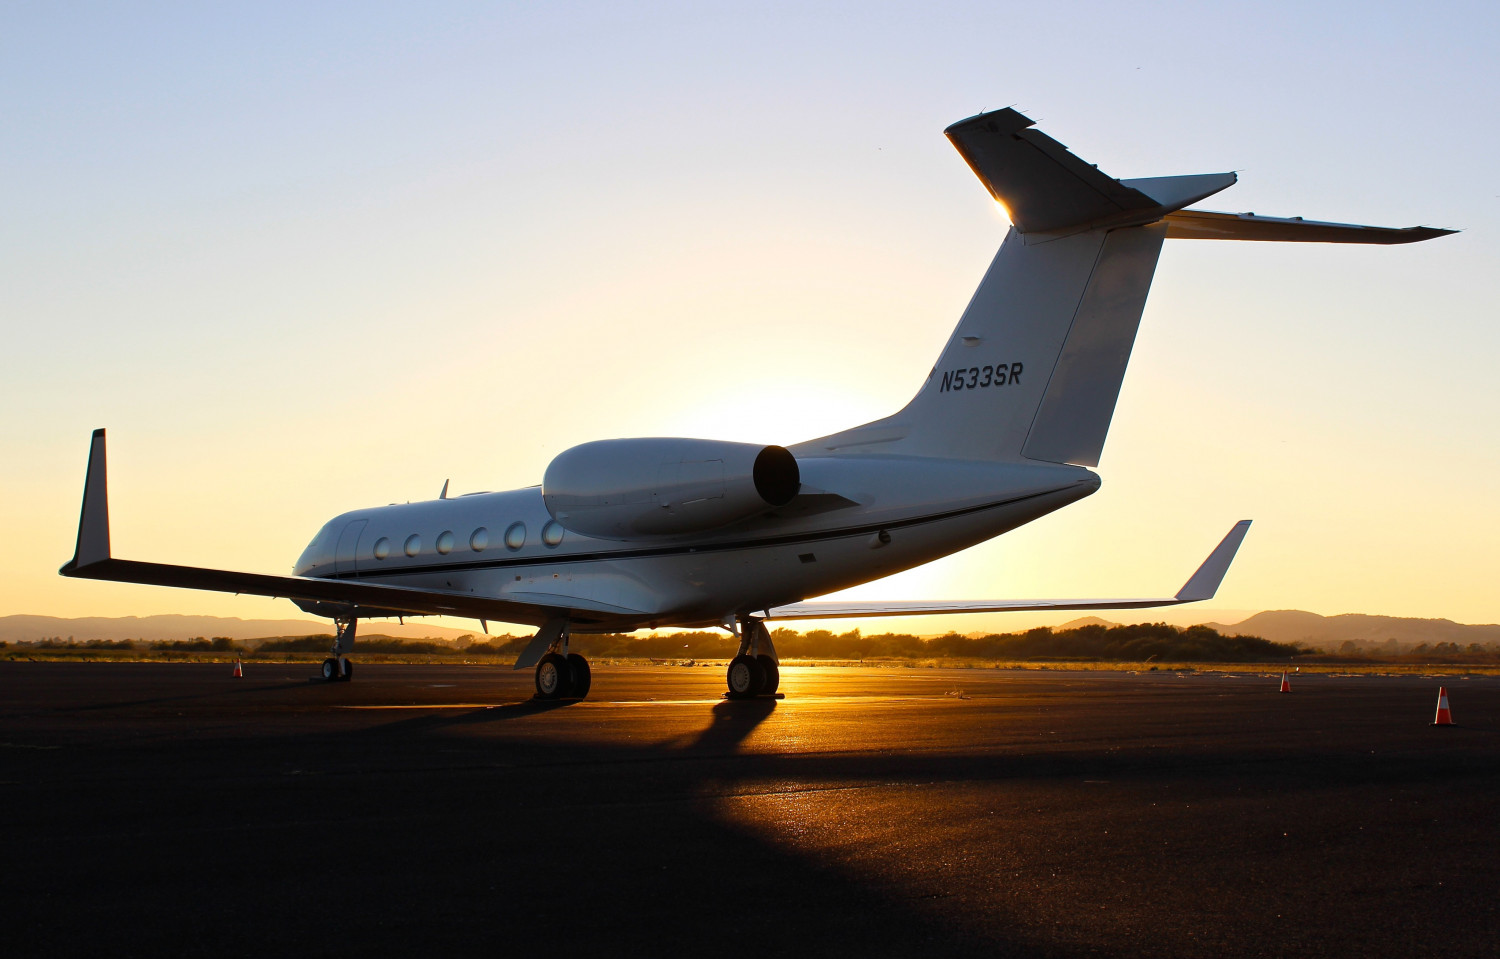 The Best Private Jet Companies for Travel from Southern California